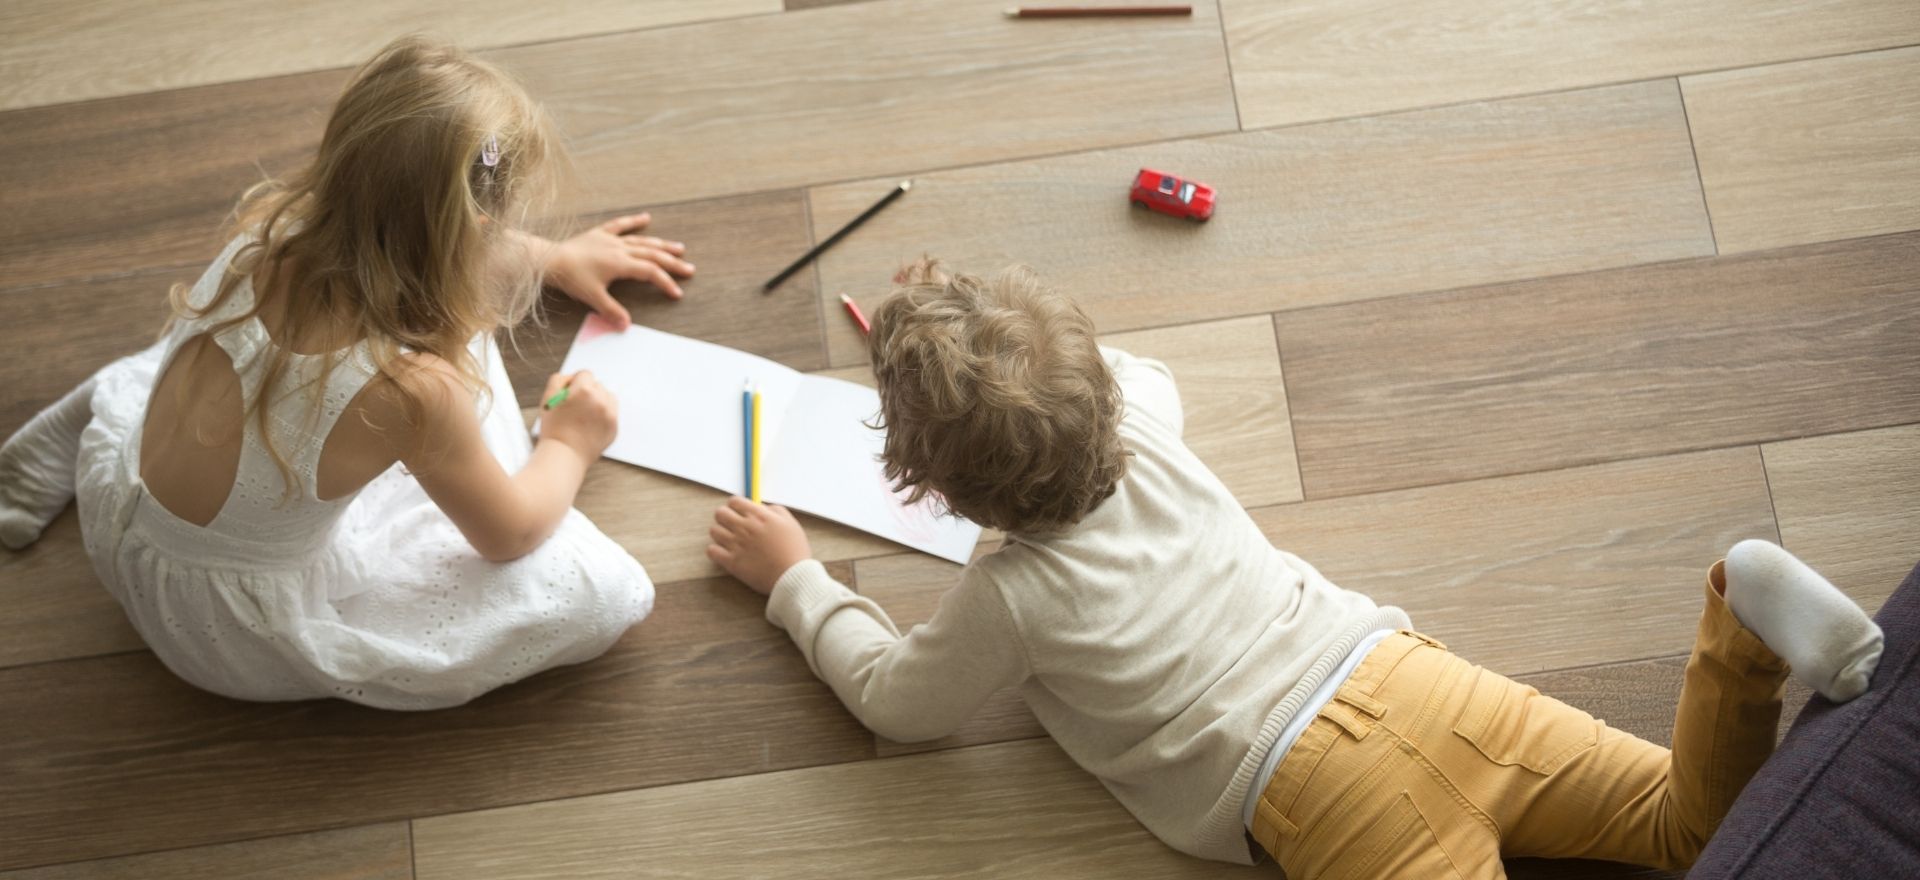 Kids on the floor drawing together